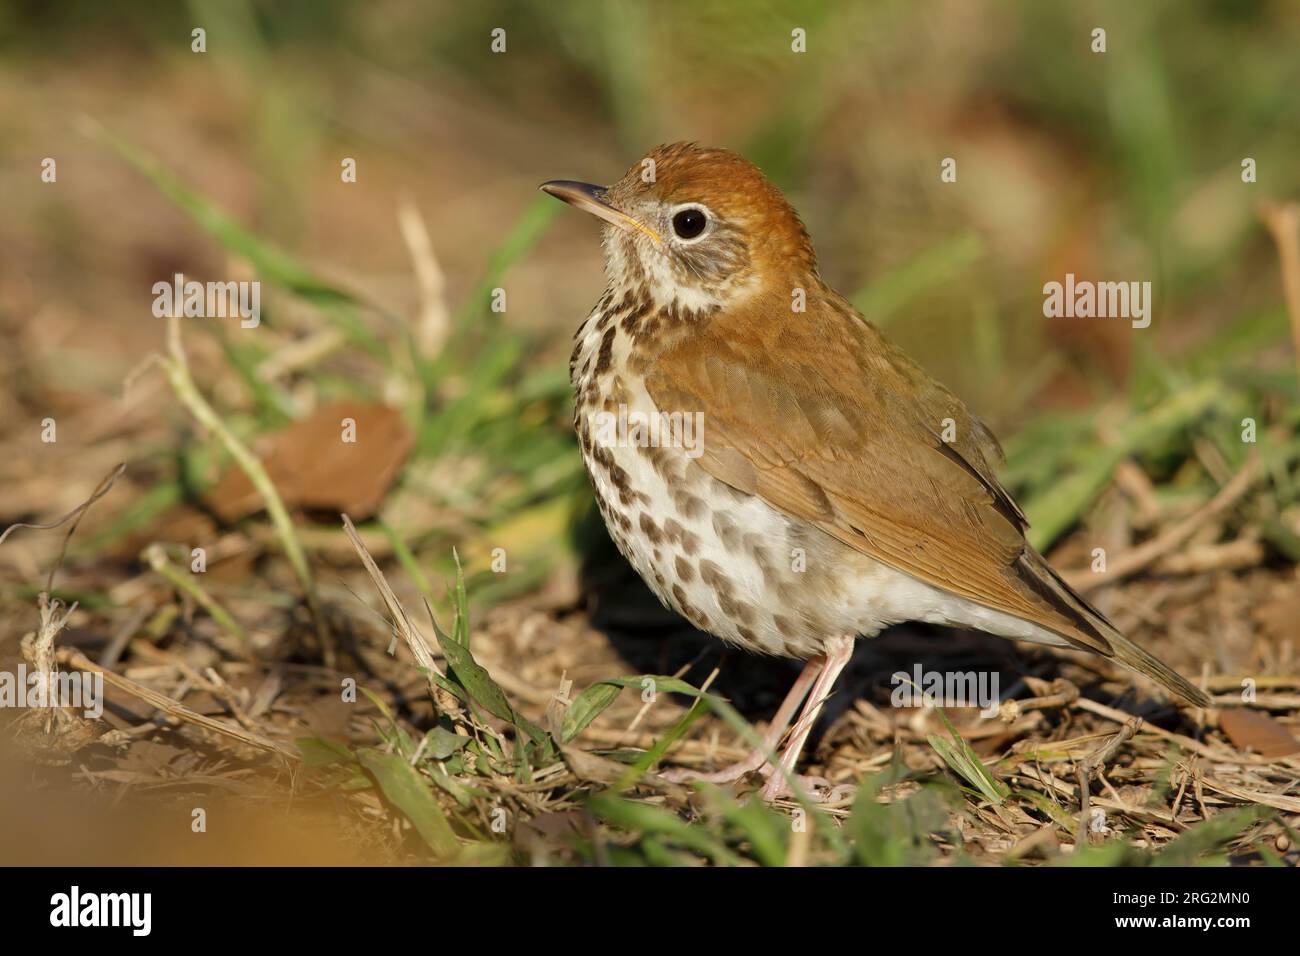 Adult Wood Thrush (Hylocichla mustelina) during spring migration at Galveston County, Texas, USA. Stock Photo